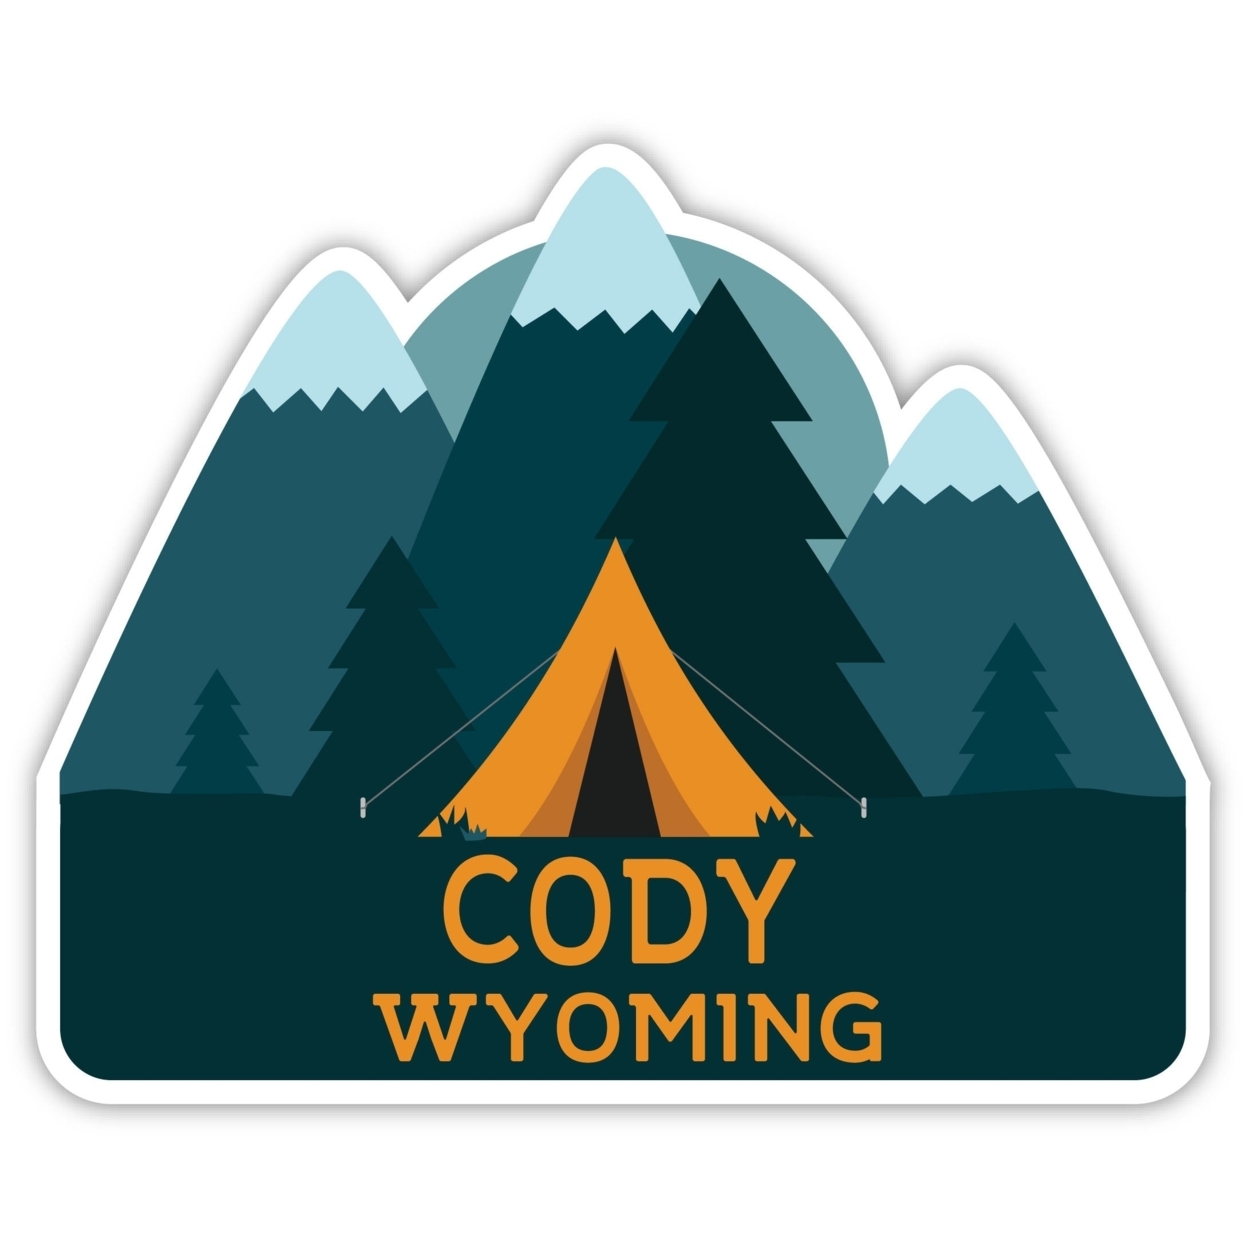 Cody Wyoming Souvenir Decorative Stickers (Choose Theme And Size) - 4-Pack, 10-Inch, Adventures Awaits